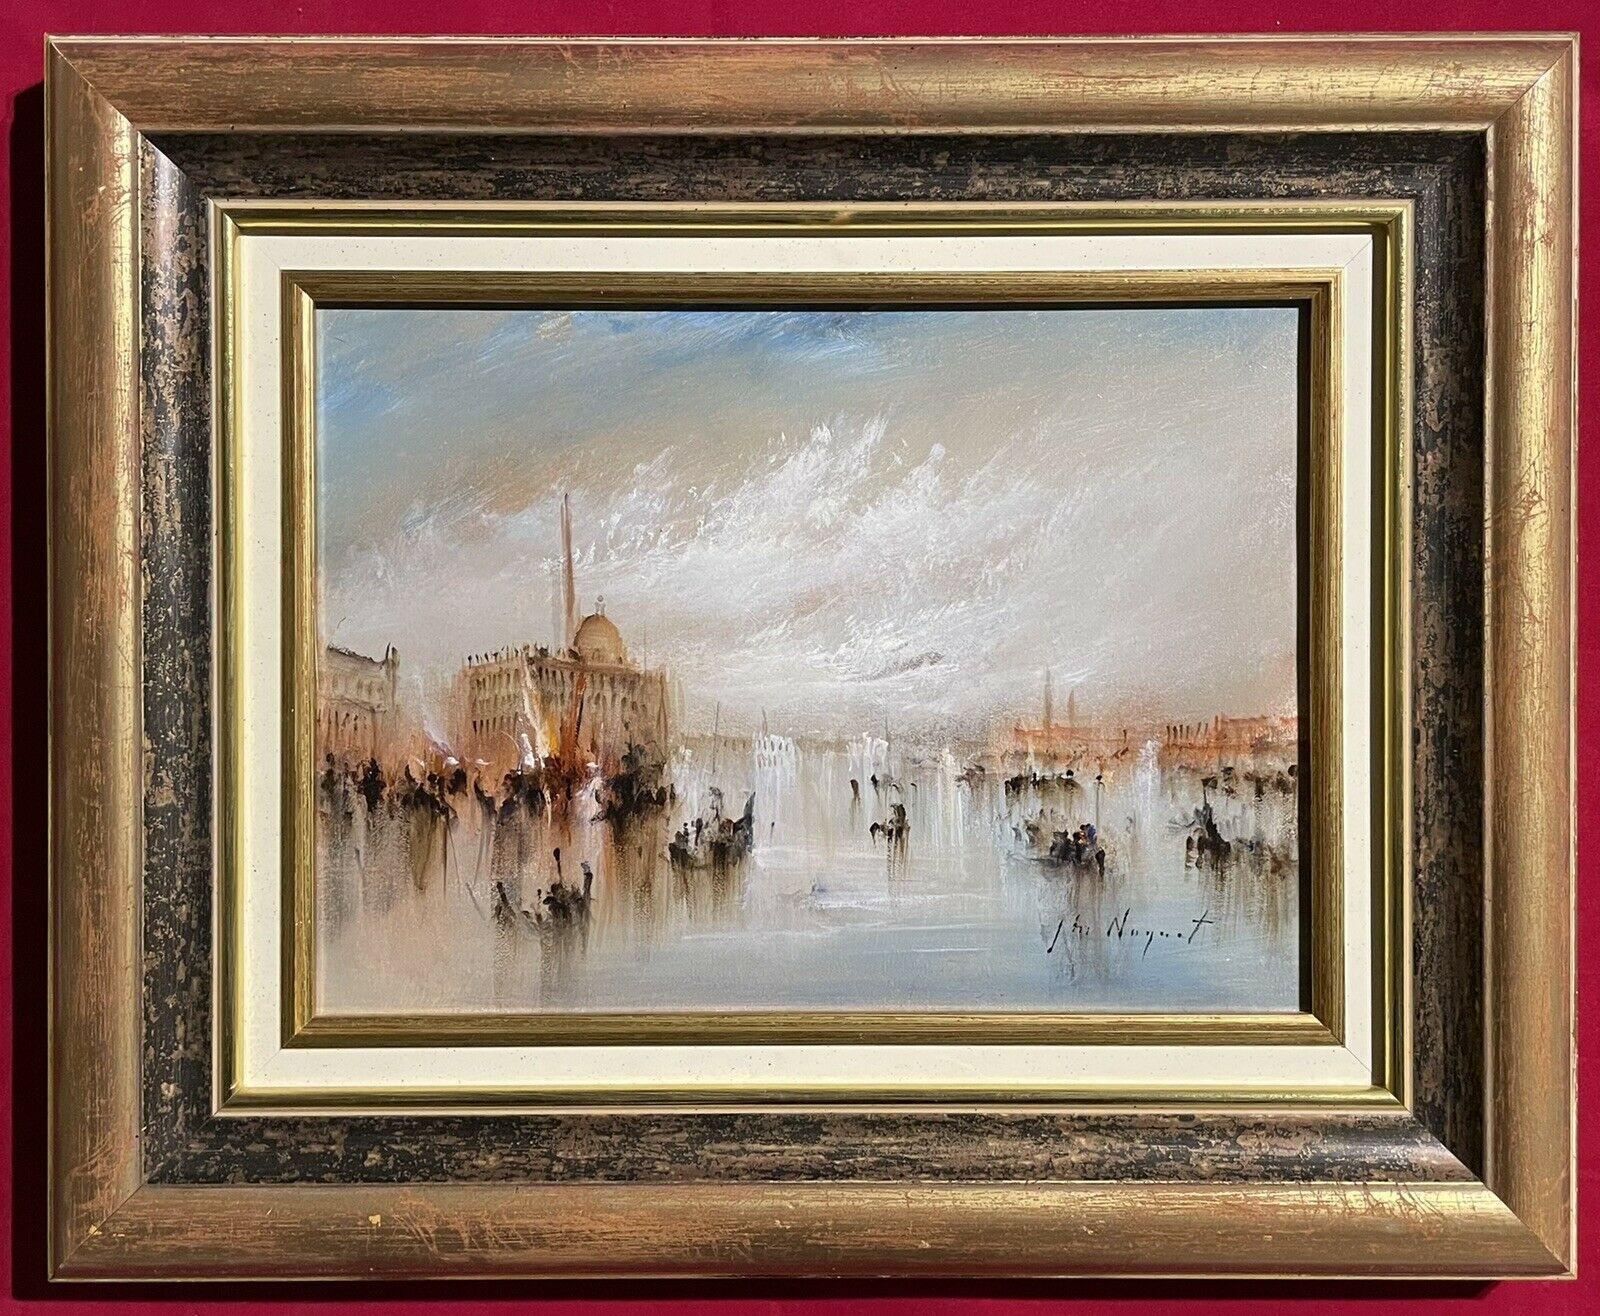 FRENCH SIGNED OIL - HAZY VENETIAN LAGOON VENICE WITH MANY BOATS AND ACTIVITY - Painting by Jean Michel Noquet